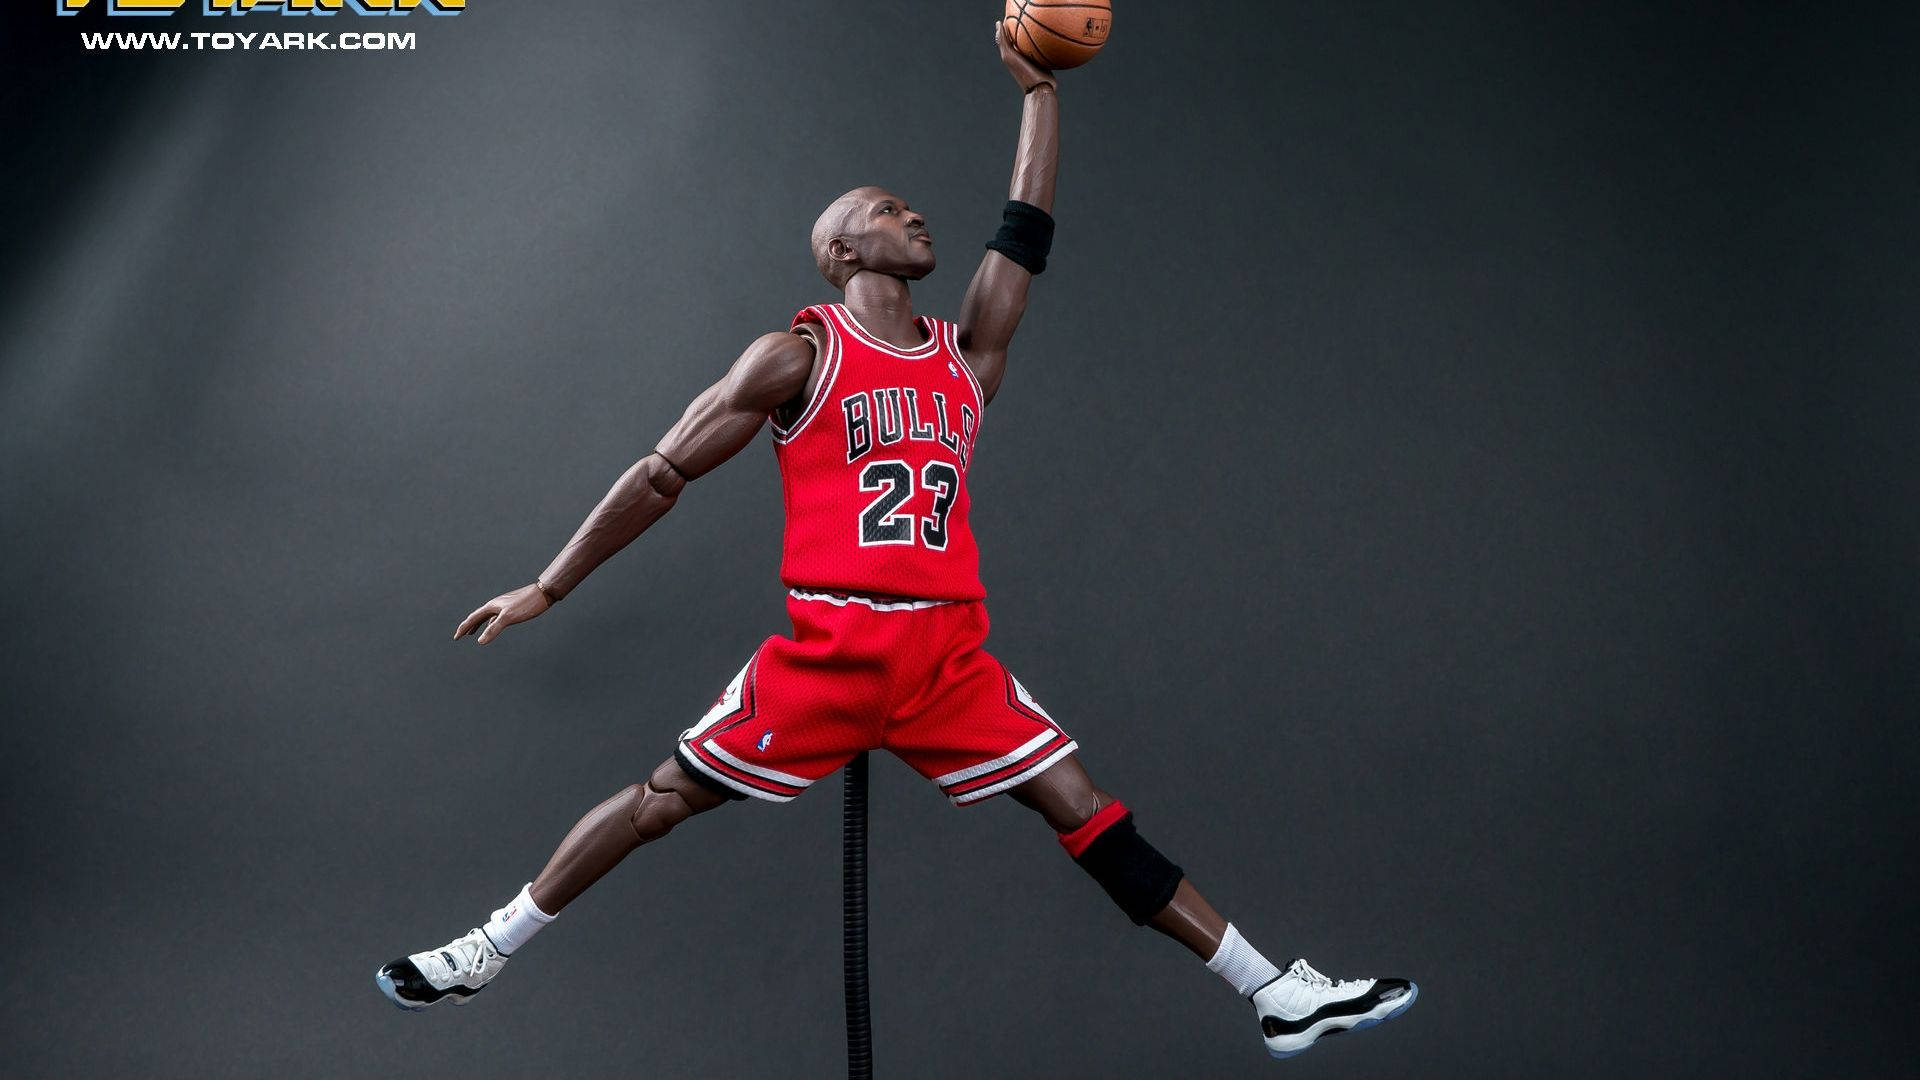 Driven To Be The Best - Michael Jordan Background